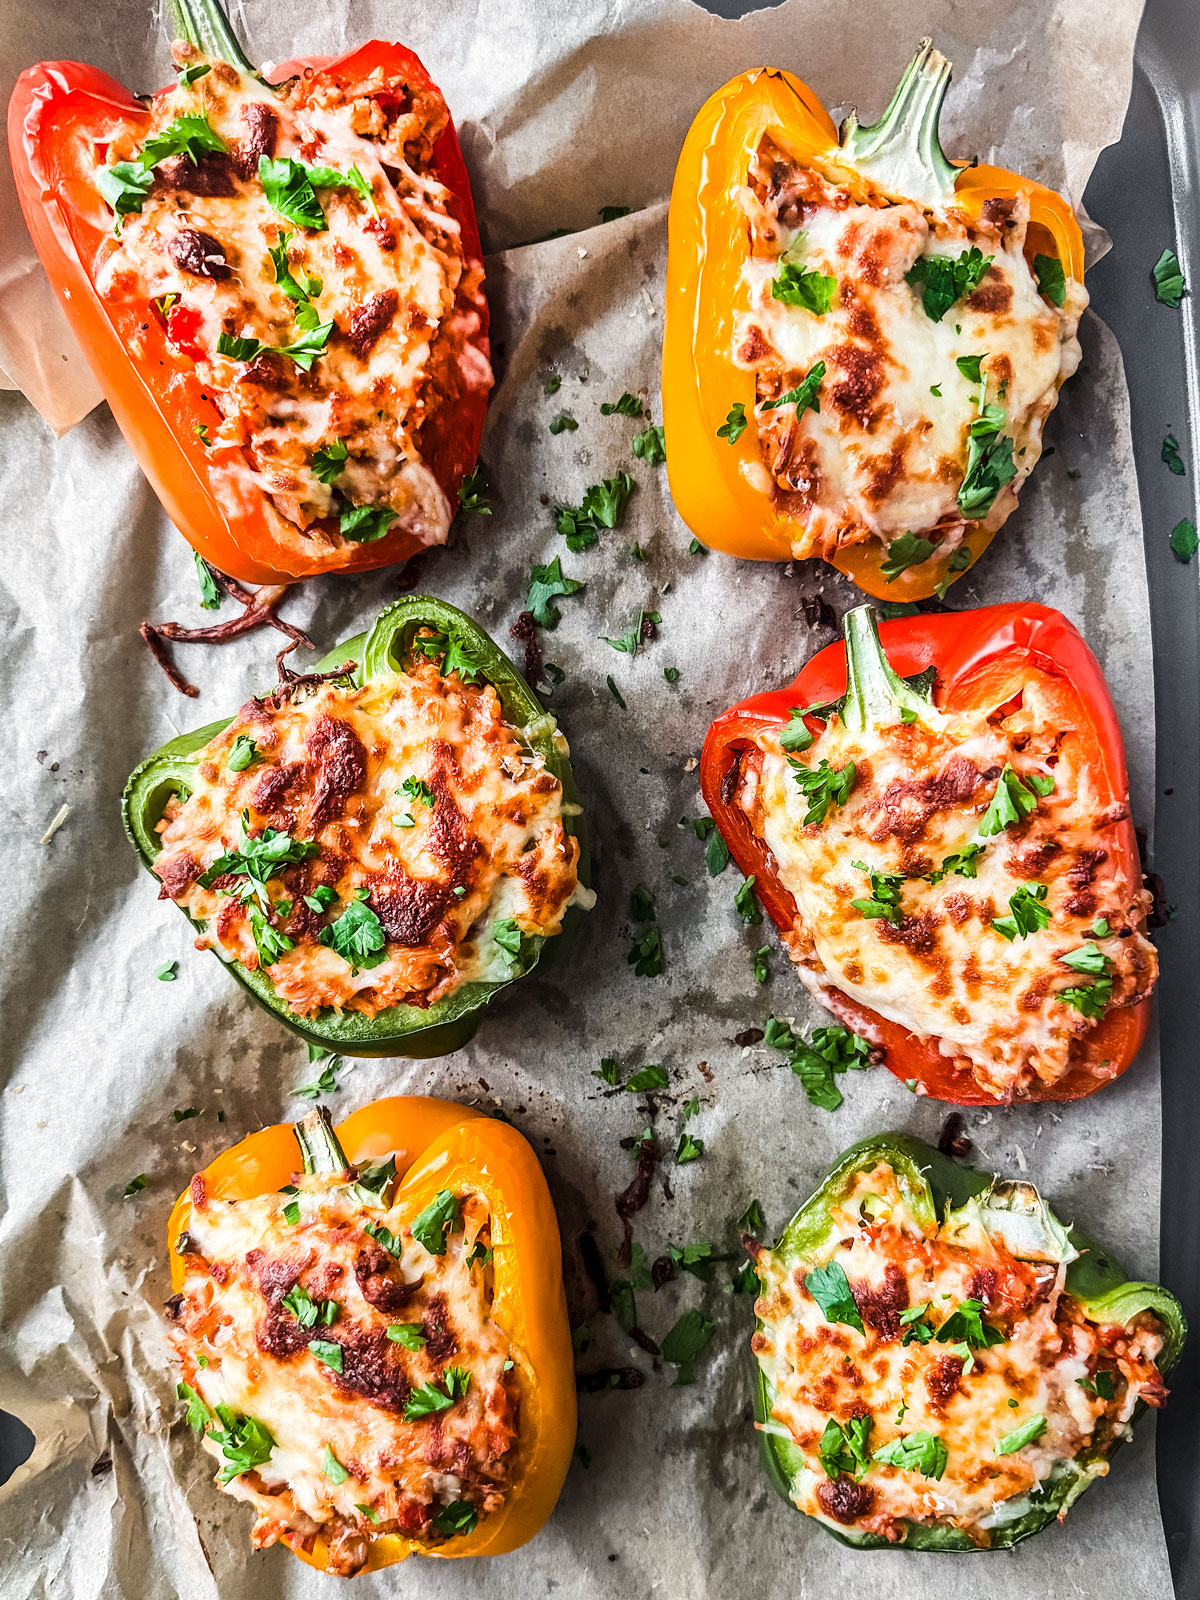 Baked cheesy stuffed peppers with ground turkey garnished with fresh parsley.